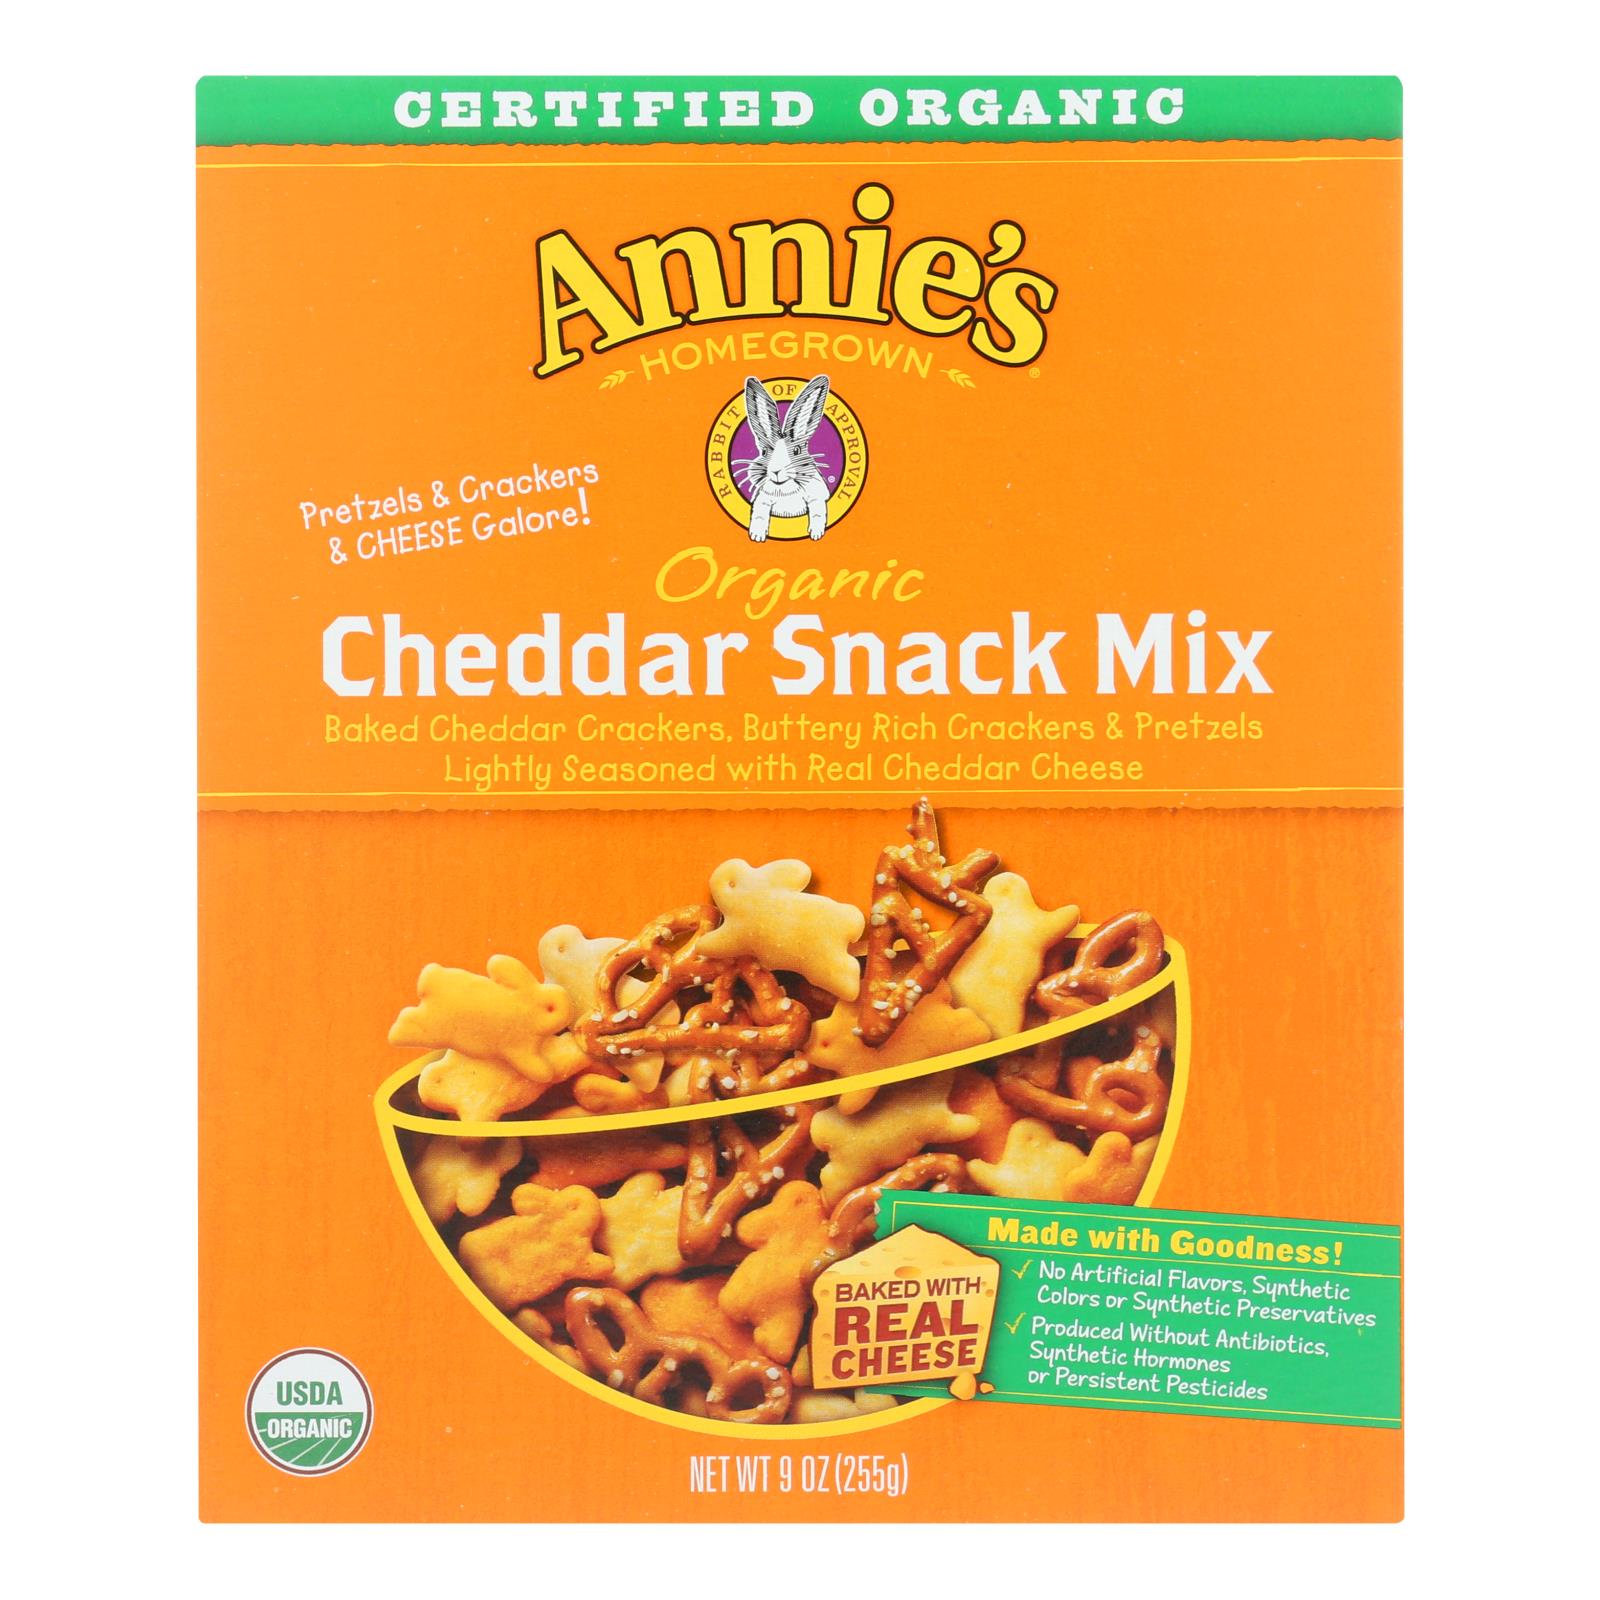 Annie'S Homegrown, Annie's Homegrown Organic Bunnies Cheddar Snack Mix - Case of 12 - 9 oz. (Pack of 12)